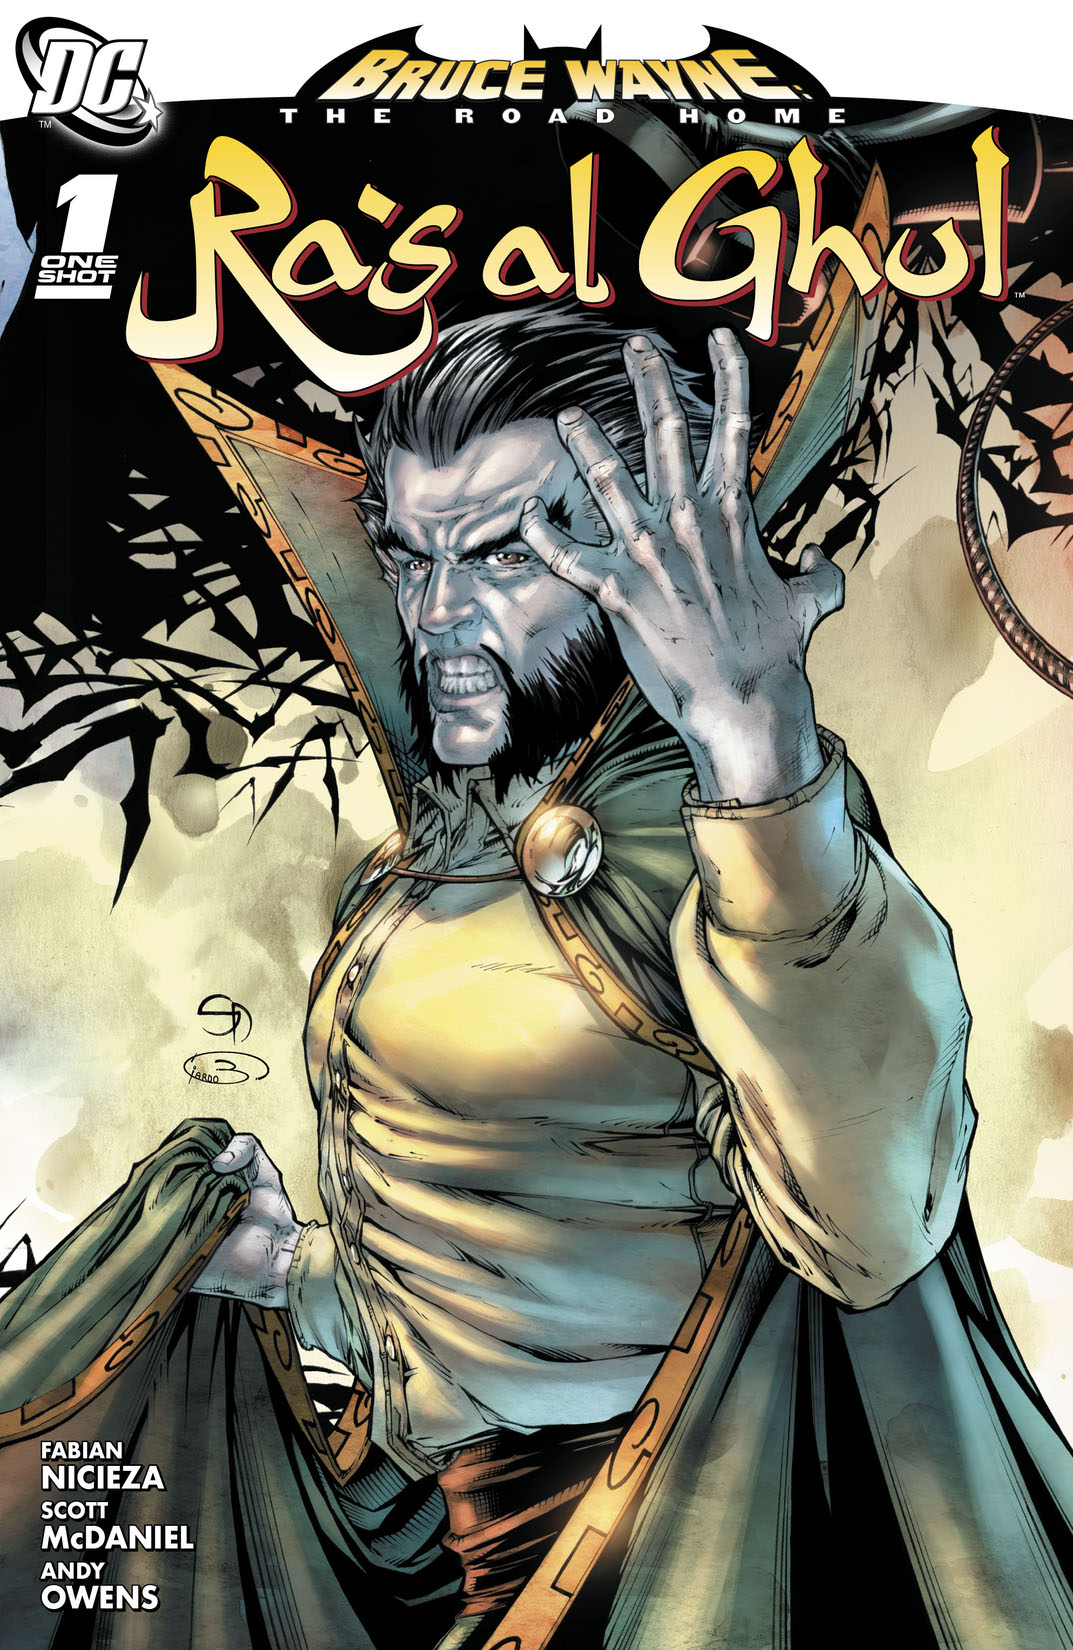 Bruce Wayne: The Road Home: Ra's al Ghul #1 preview images